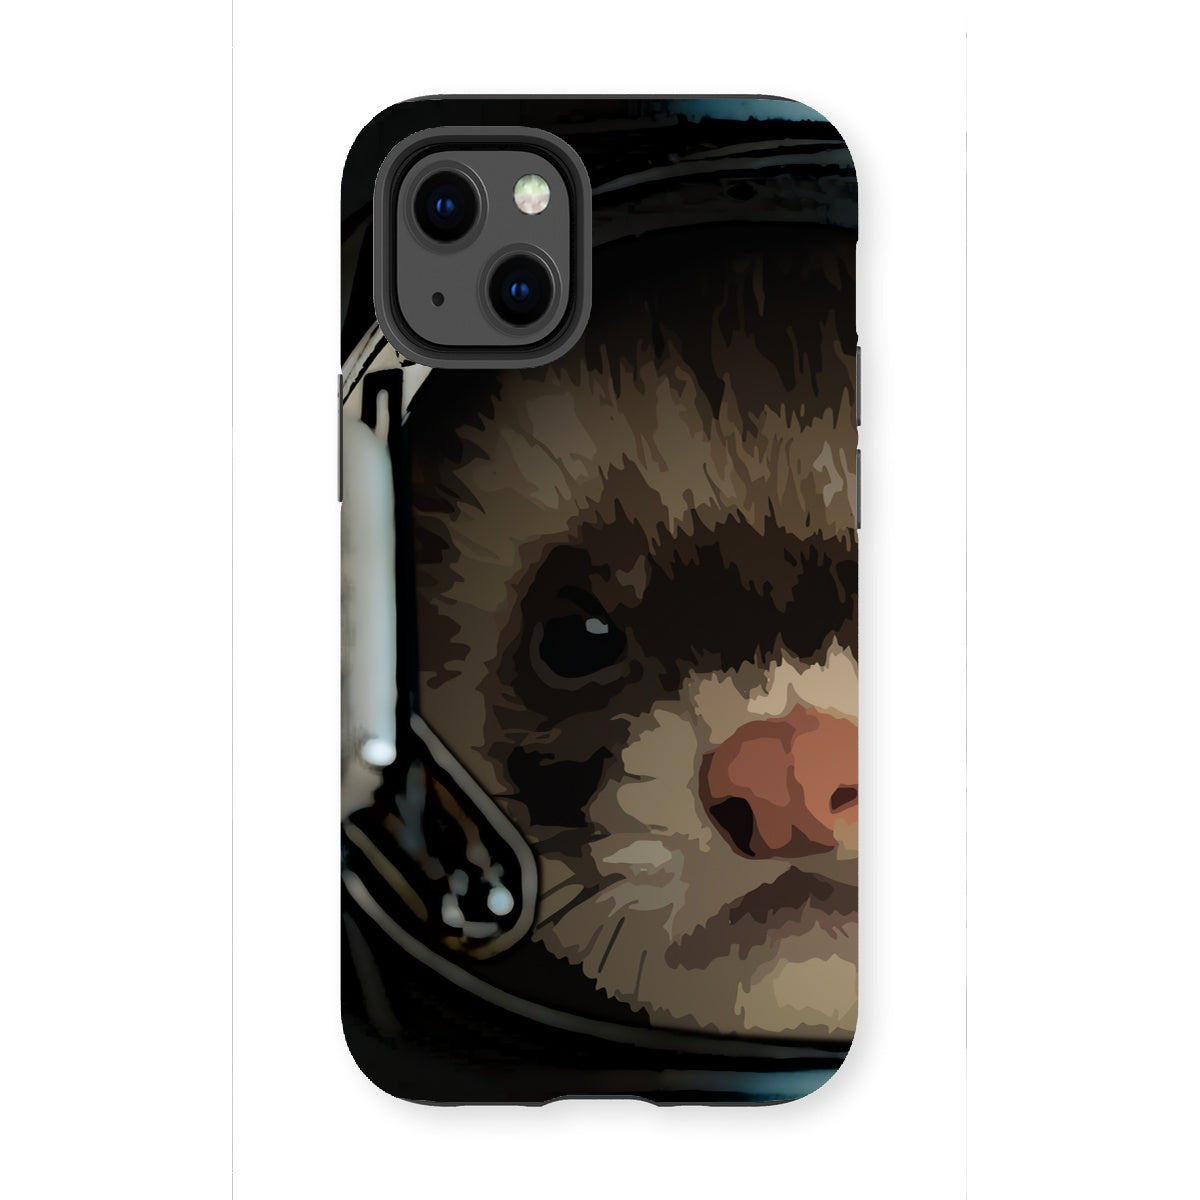 For All Ferretkind Tough Phone Case